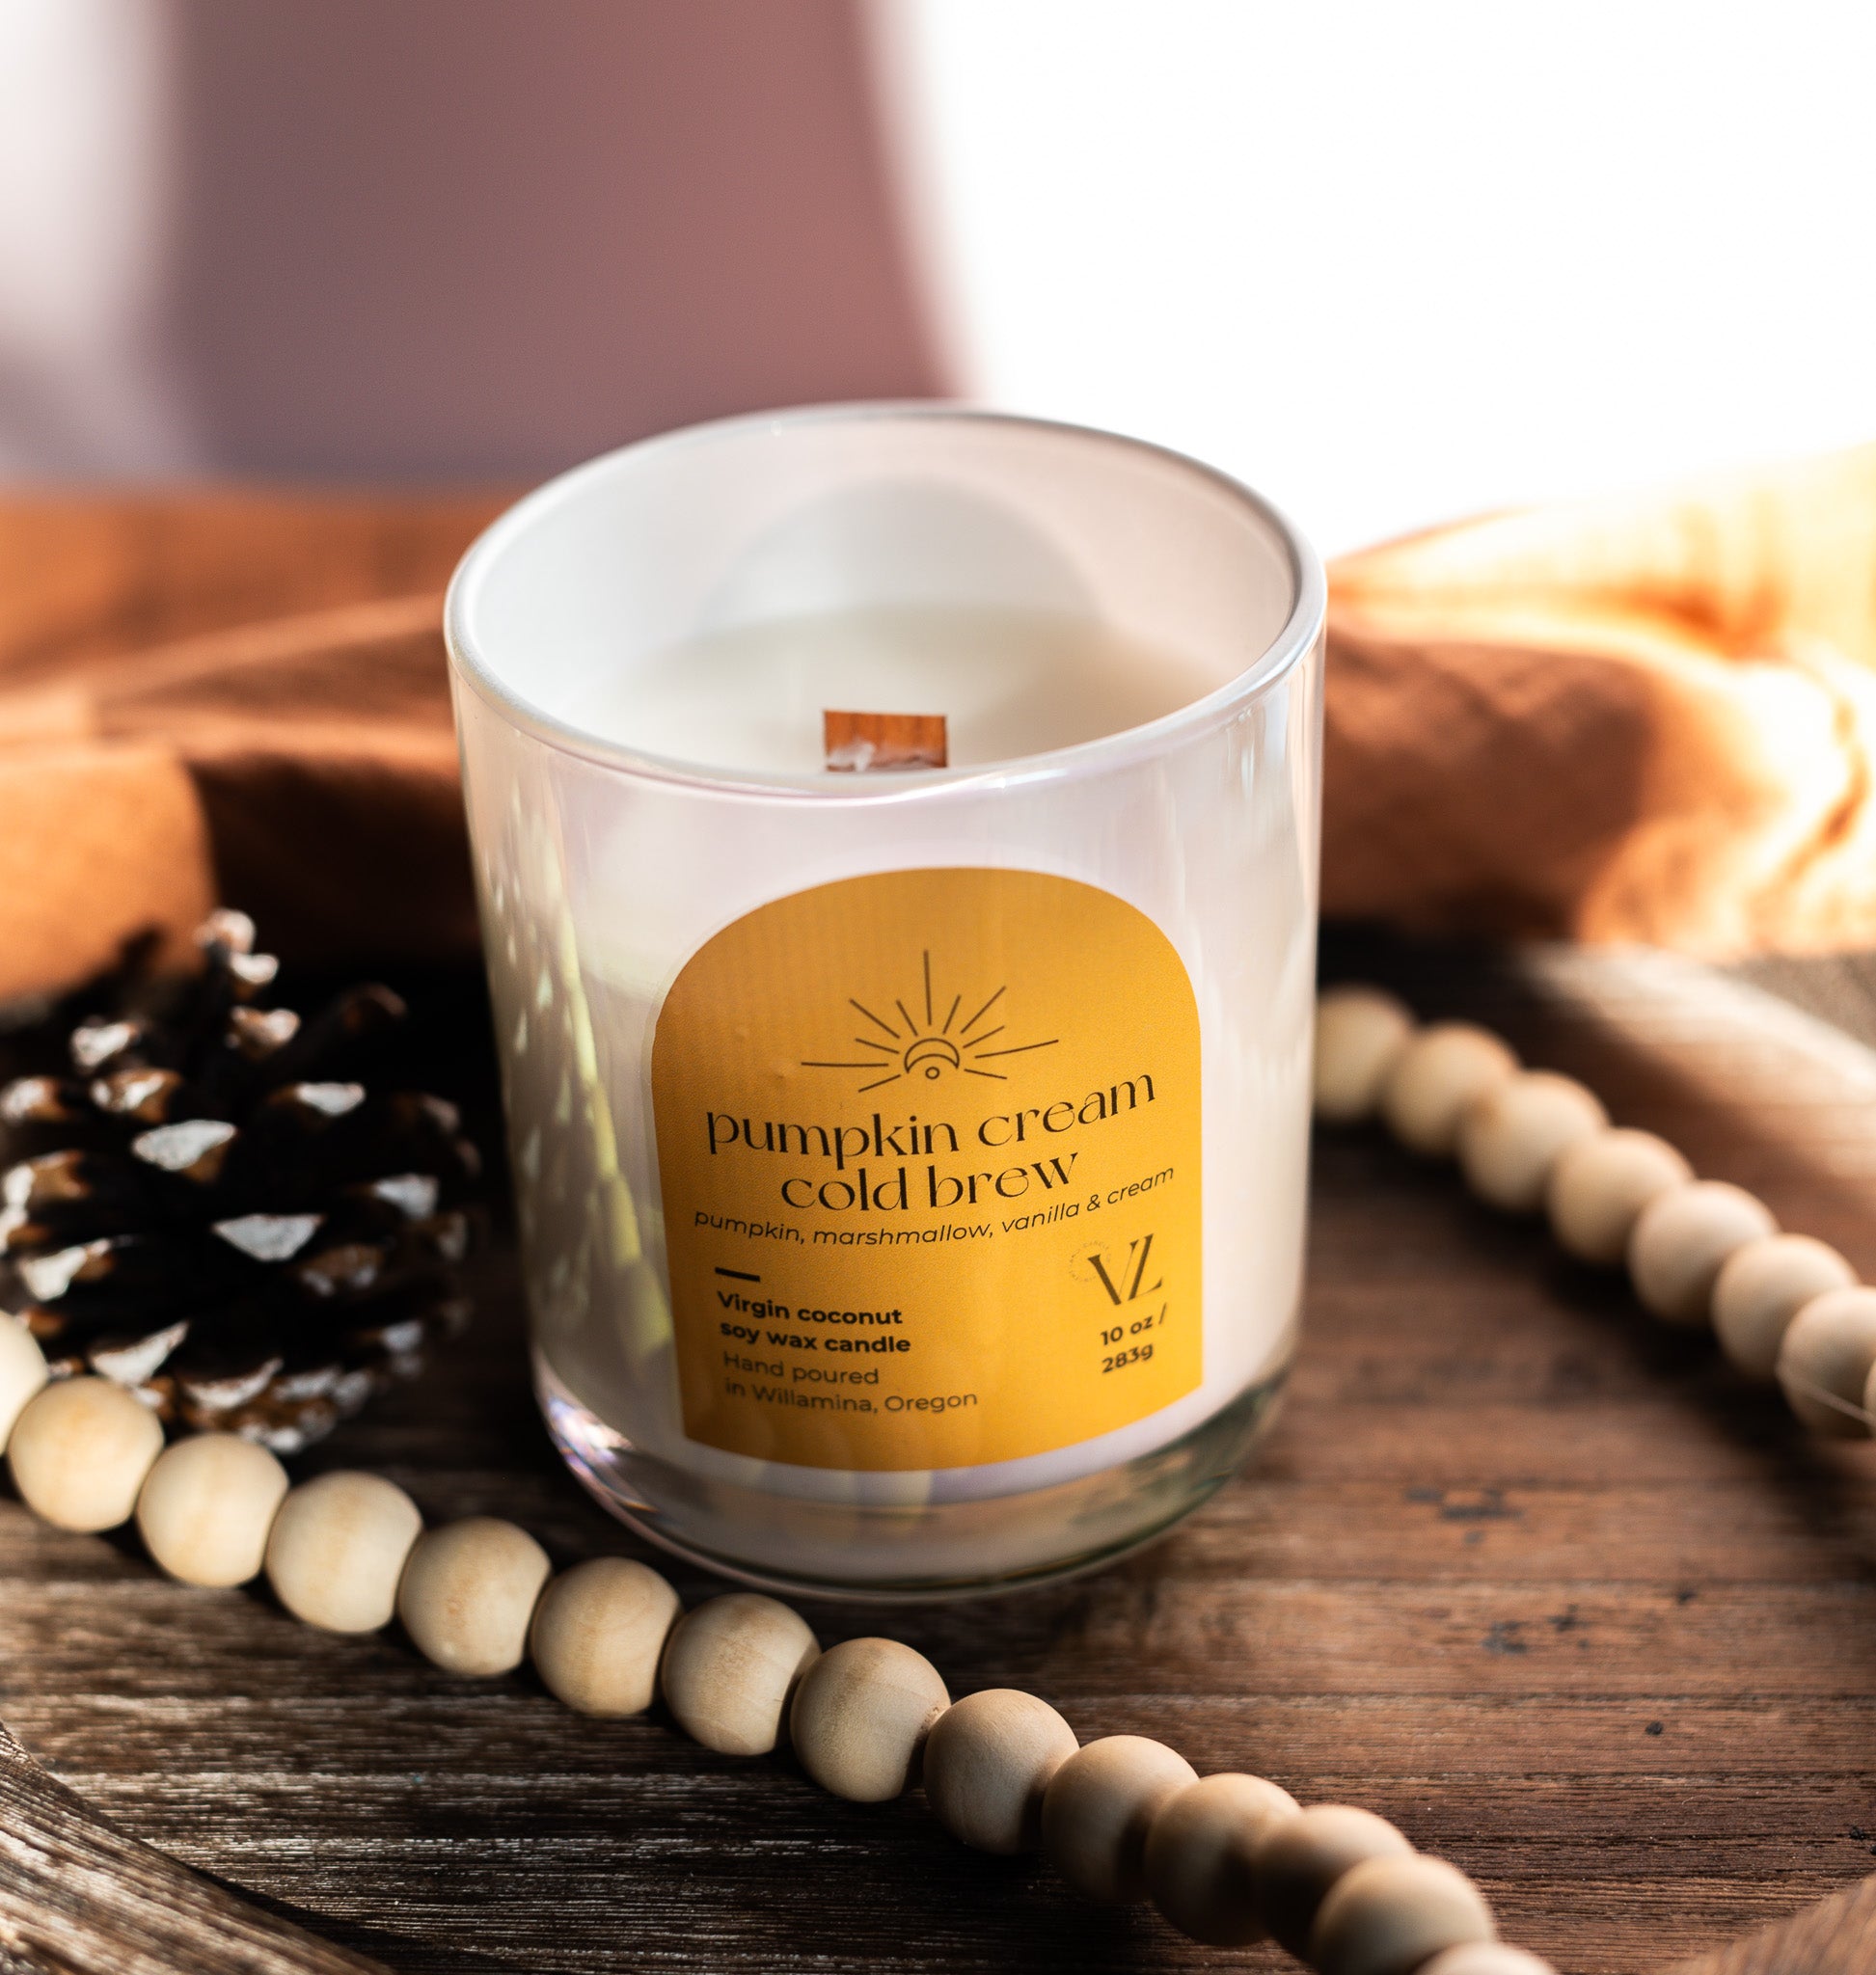 Pumpkin Cream Cold Brew coconut soy wax candle | whipped pumpkin, coffee, vanilla - Vincent Land Candle Co.